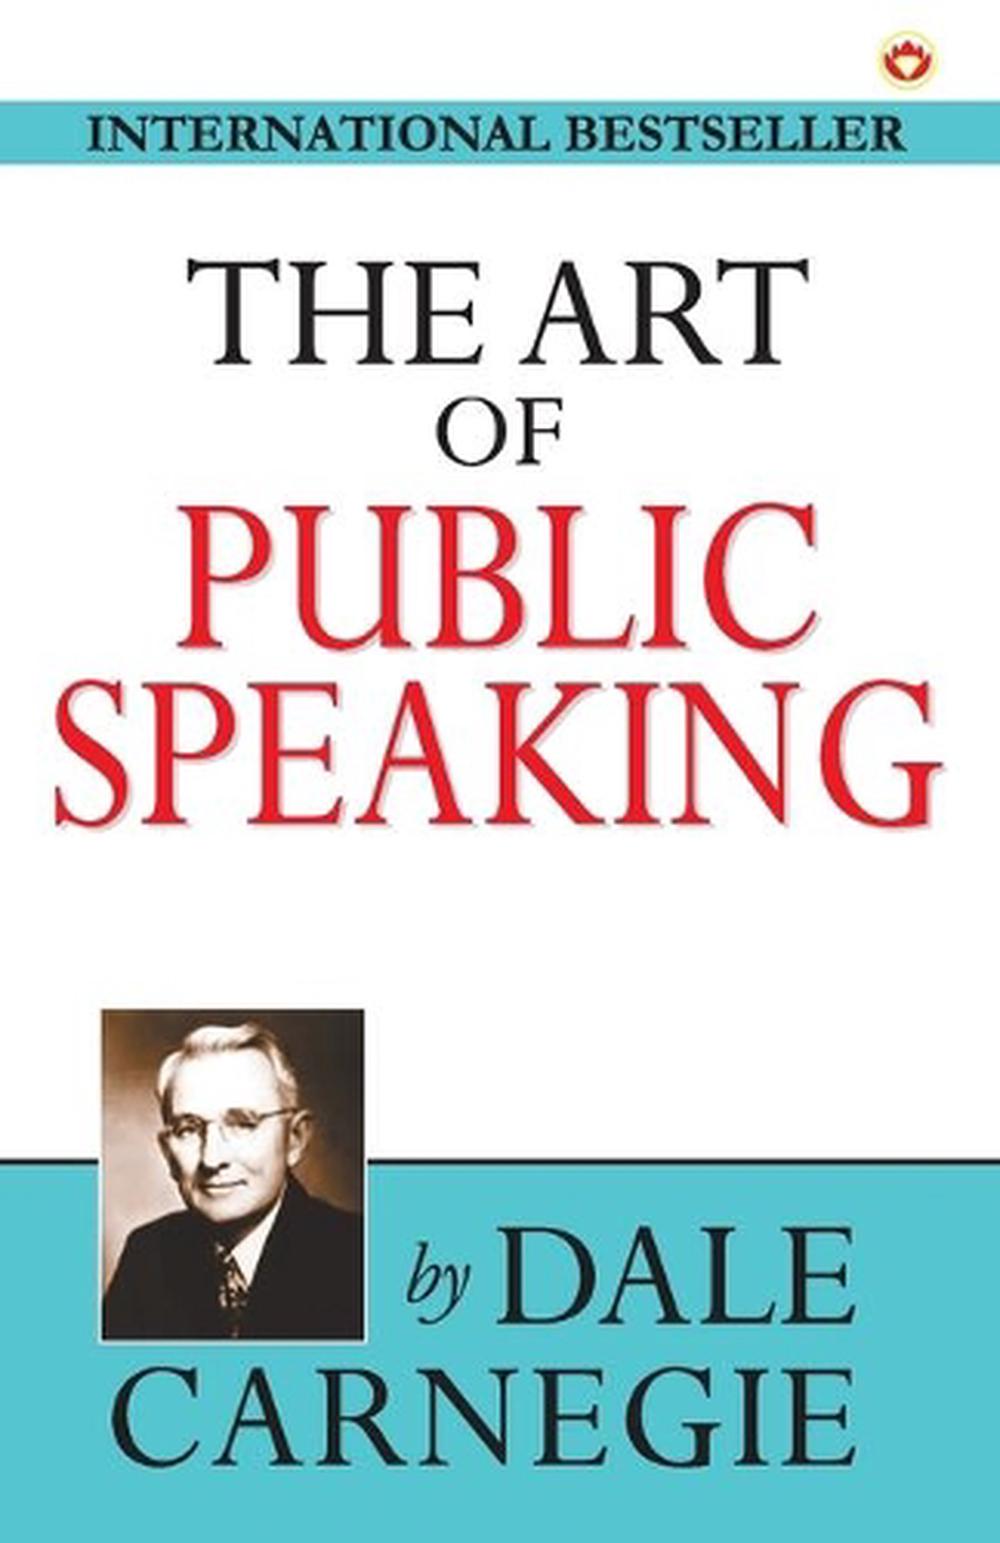 book review of the art of public speaking